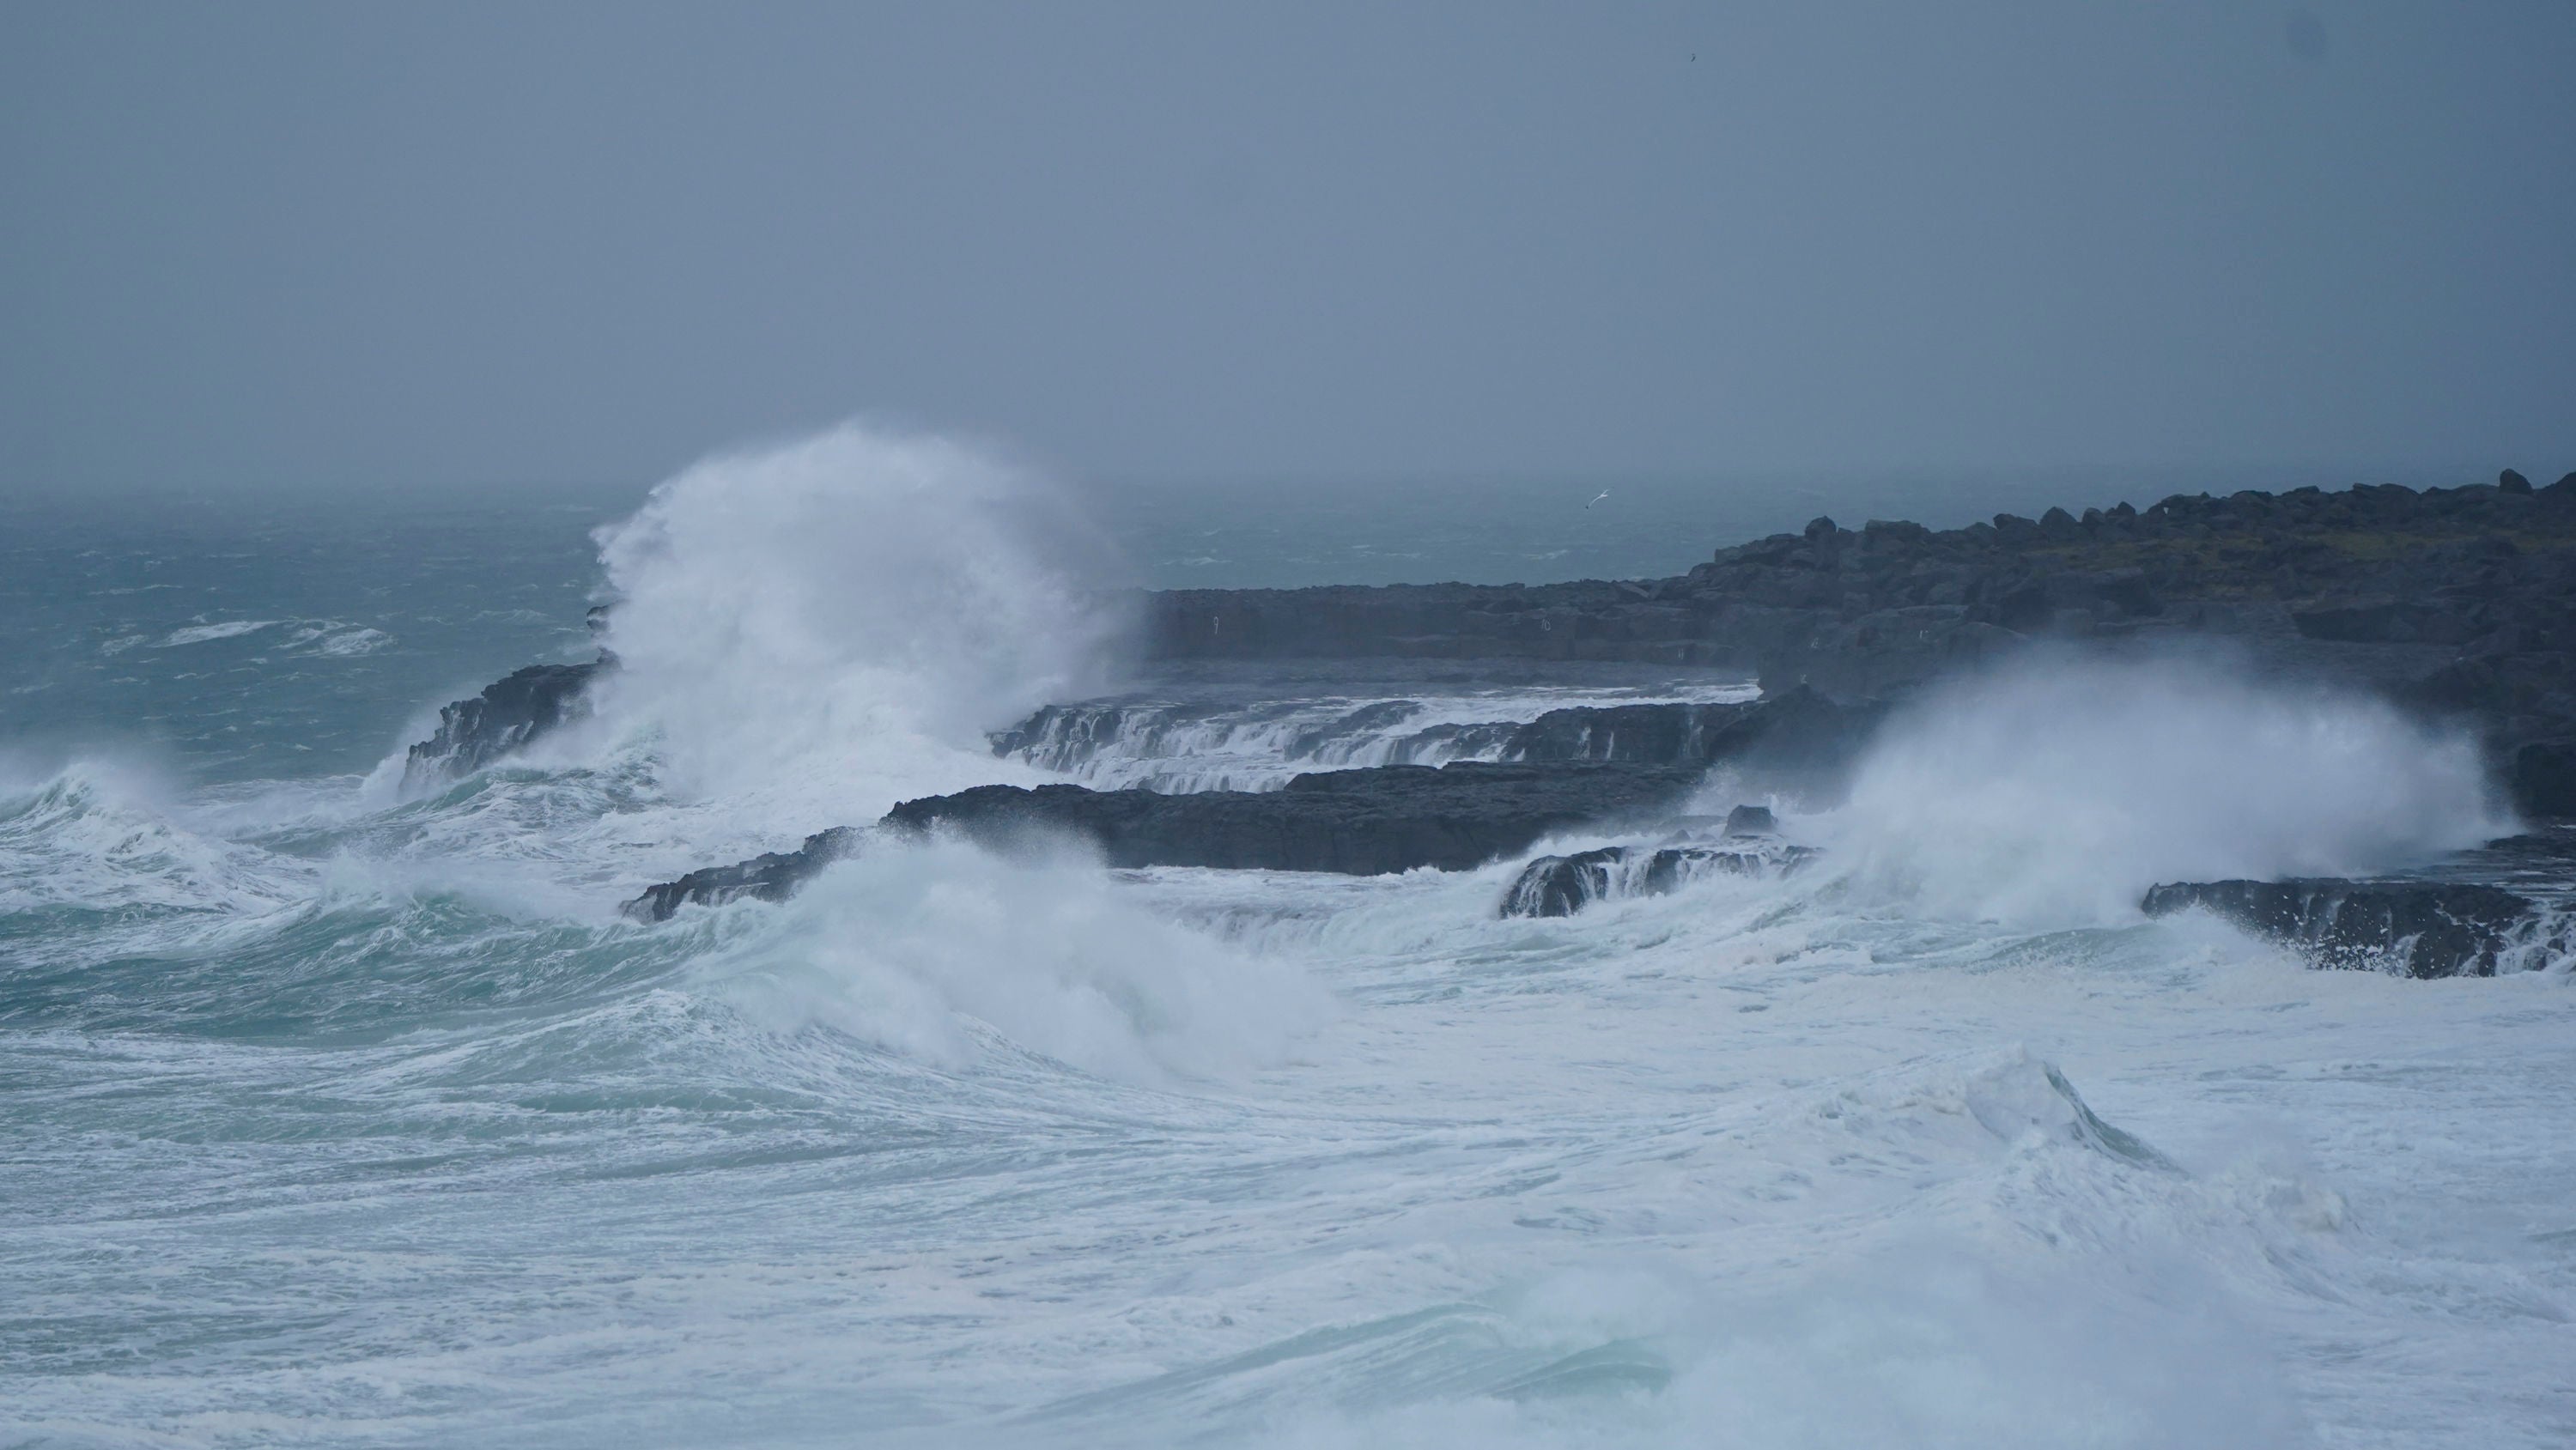 High Atlantic swells at Fanore, County Clare in the Republic of Ireland as Storm Jocelyn hits